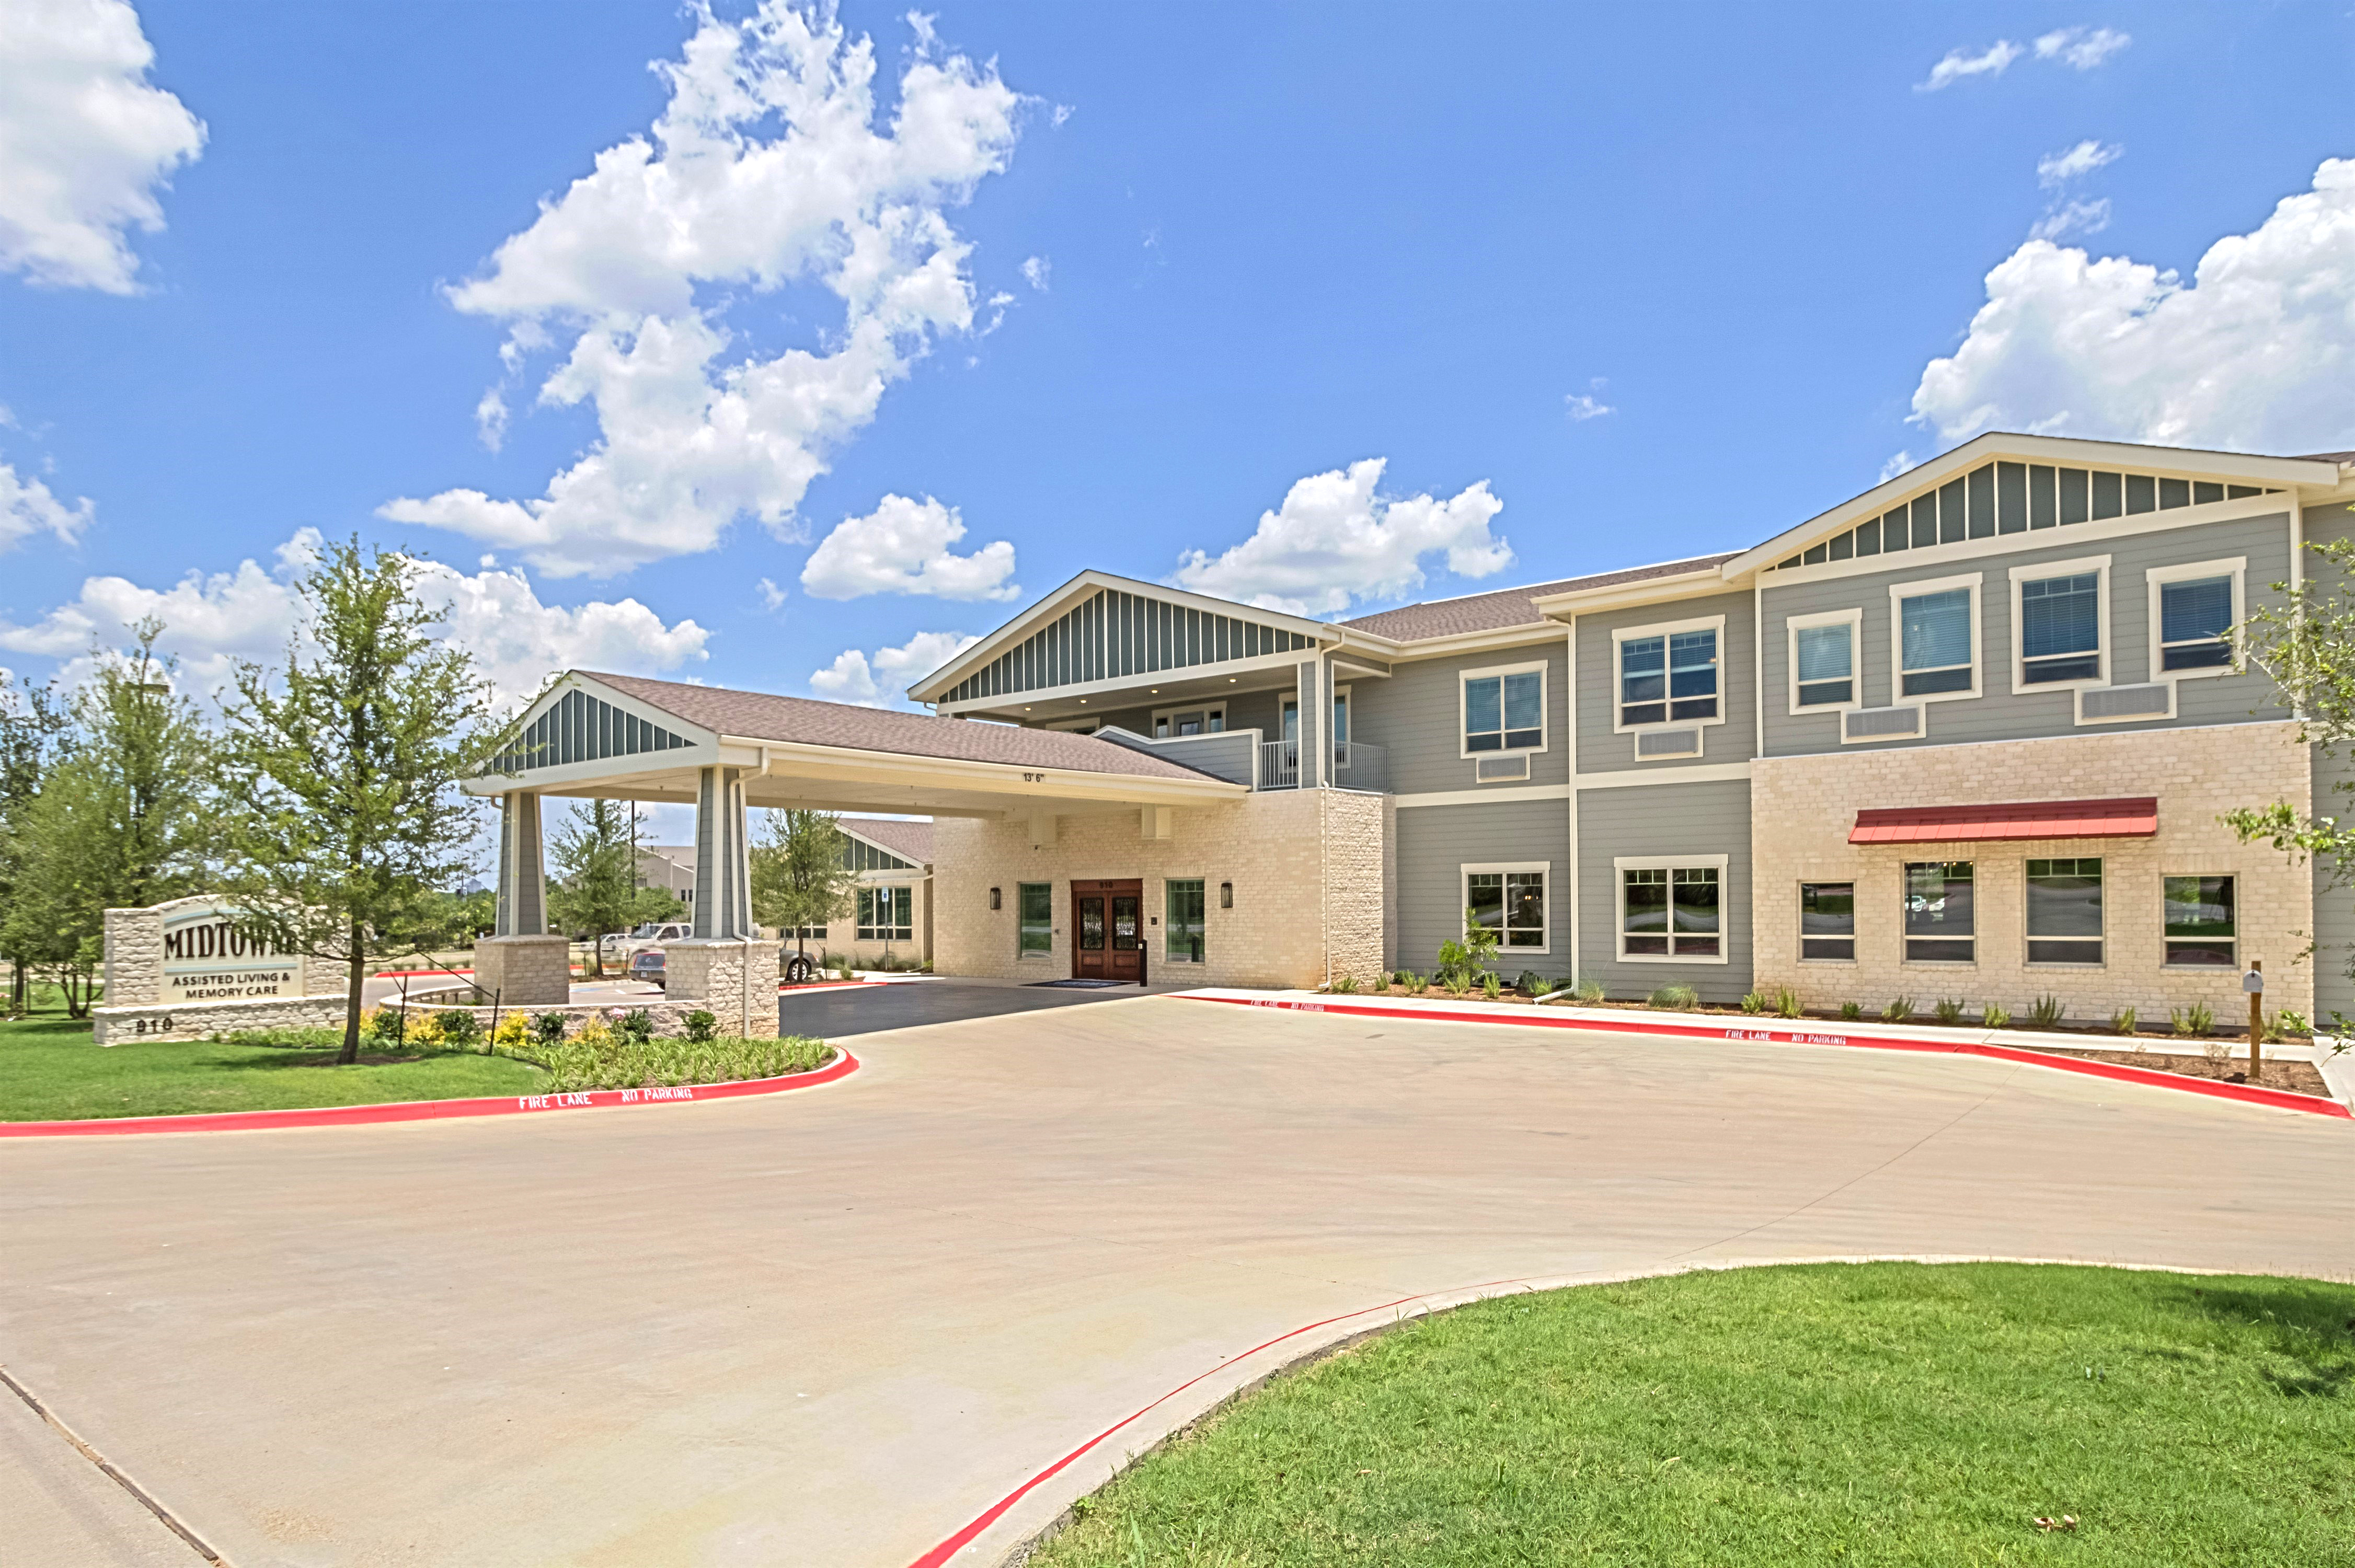 Midtowne Assisted Living and Memory Care image